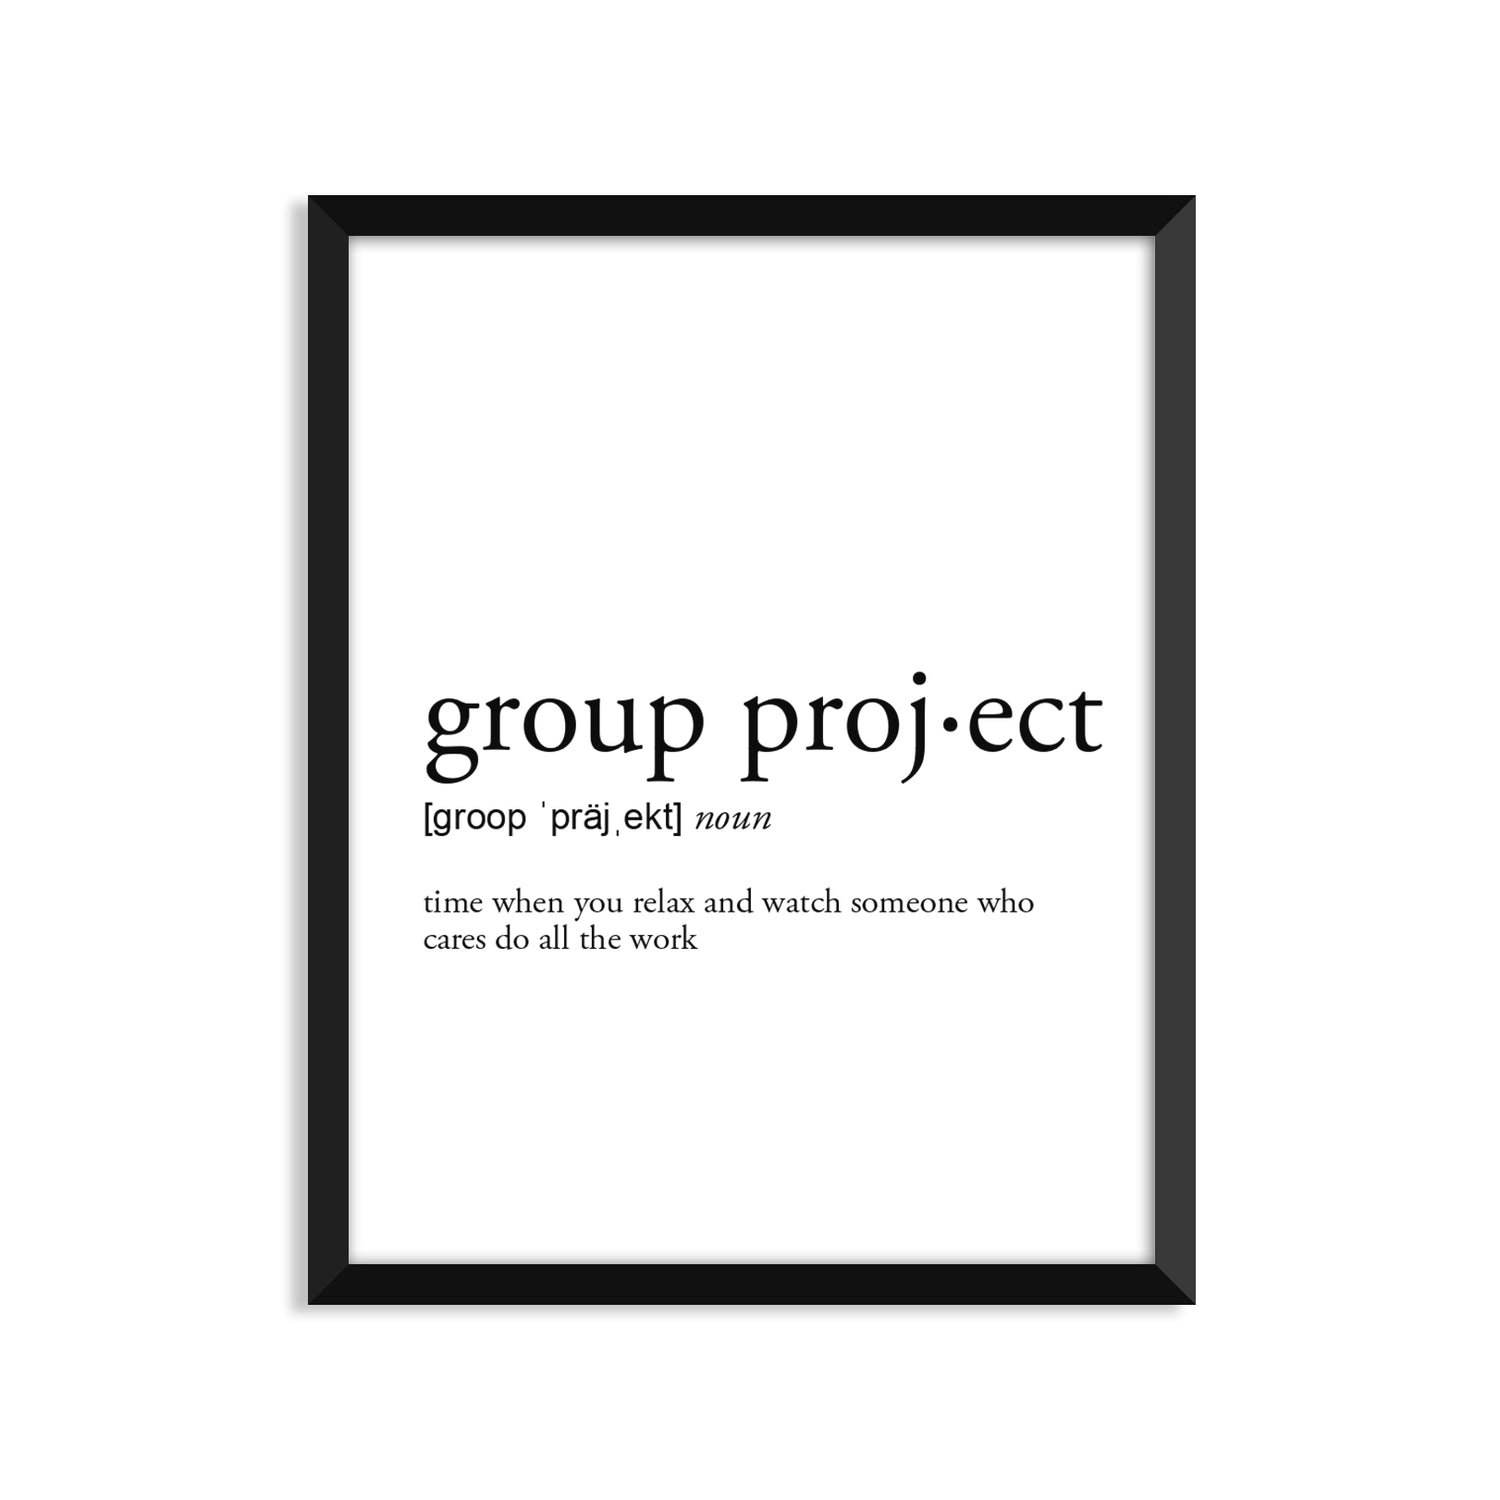 Group Project Definition - Unframed Art Print Or Greeting Card